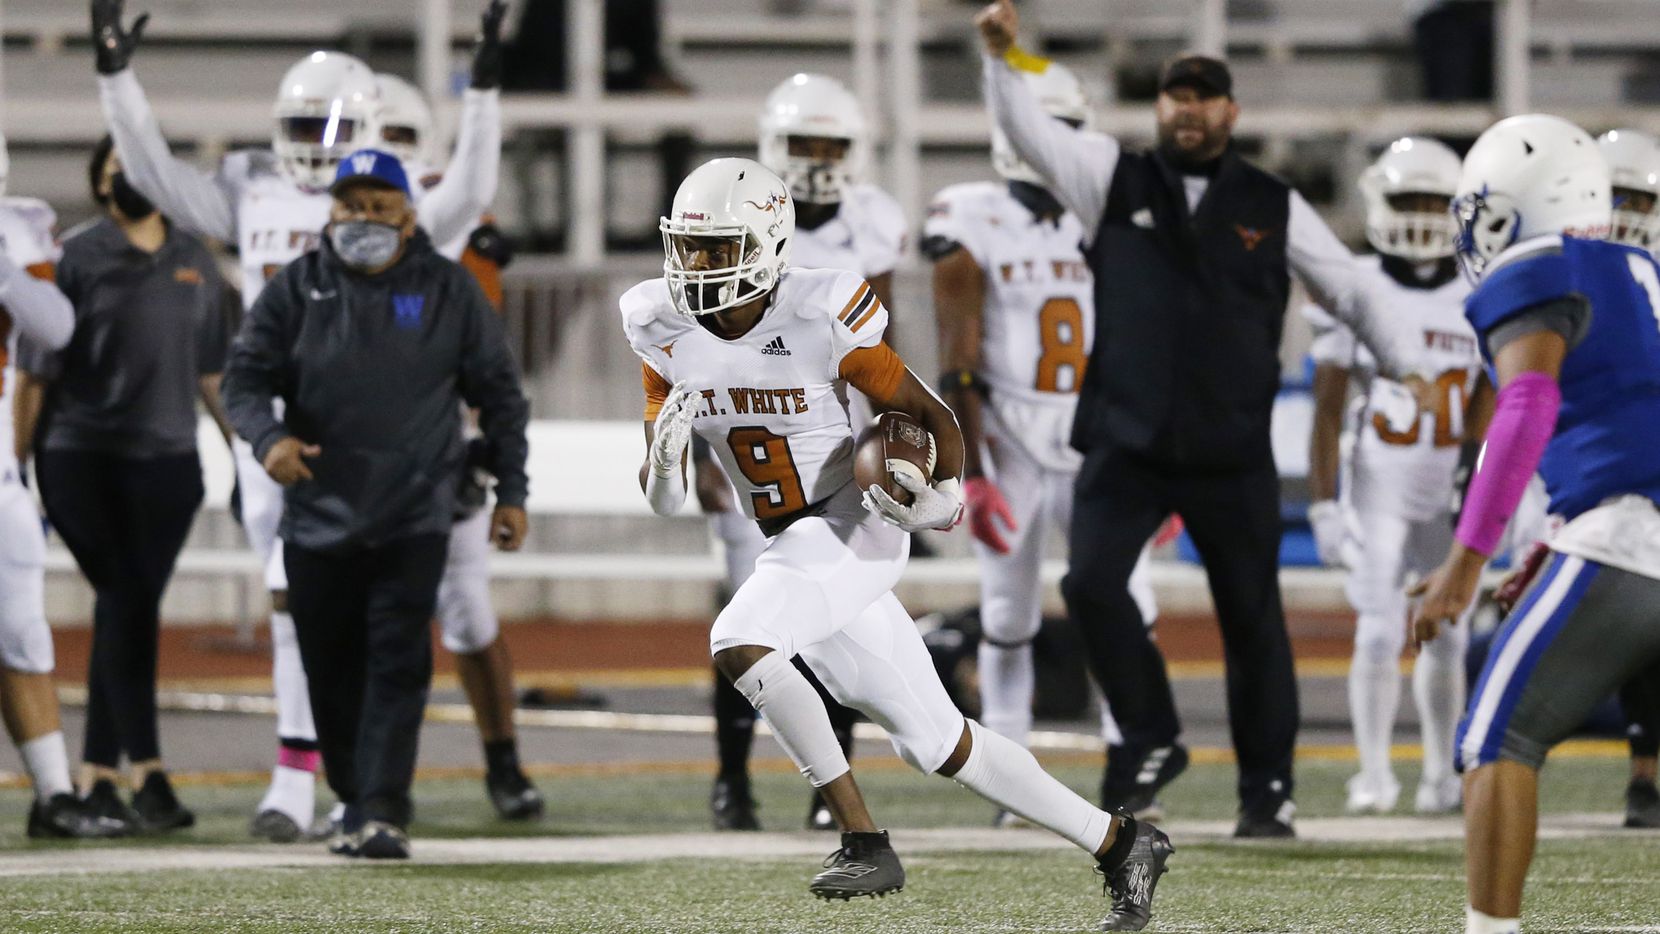 W.T. White's Dejon Baker (9) runs up the field in a game against Carrollton R.L. Turner's...